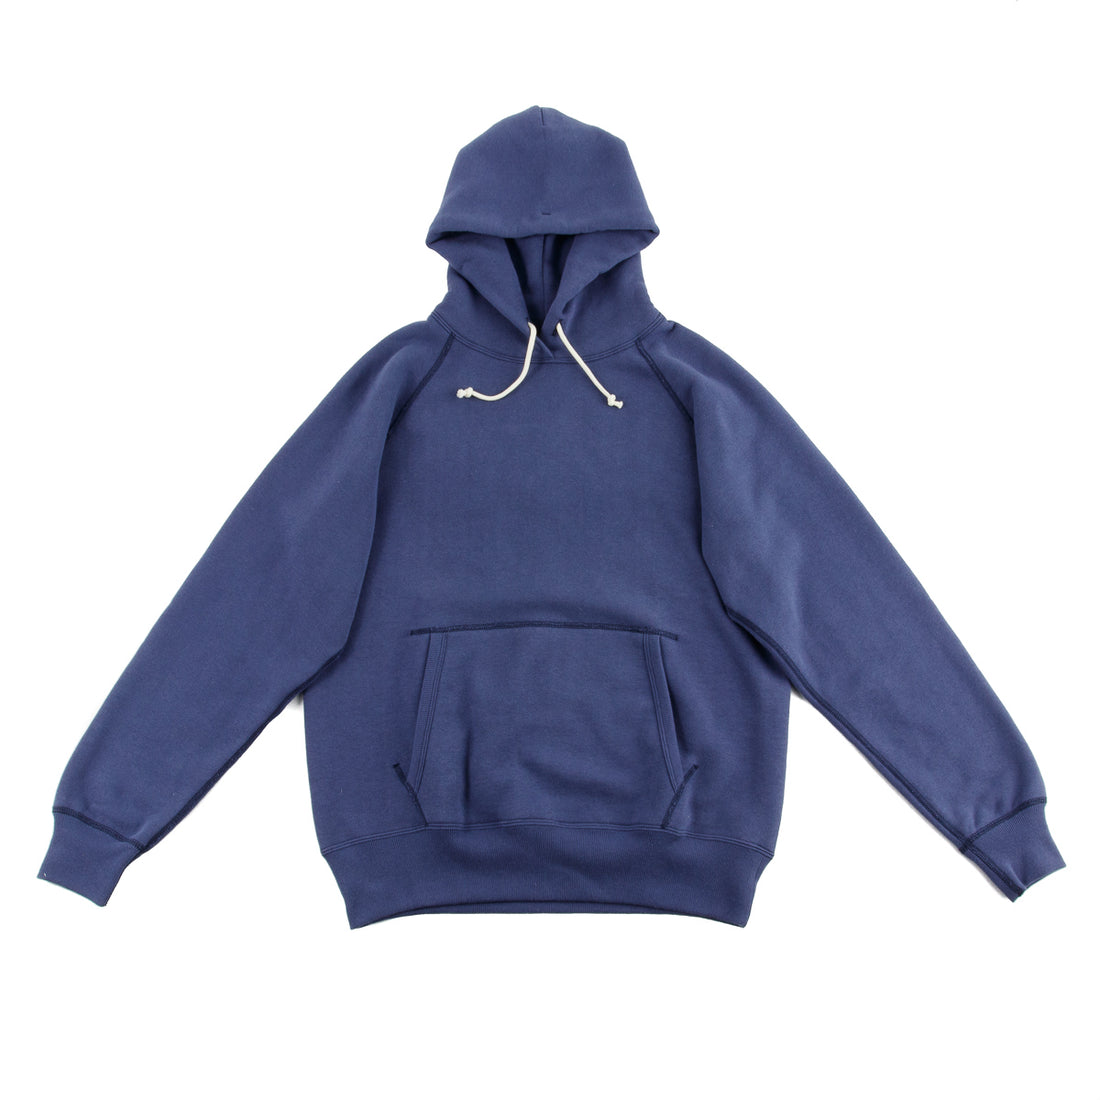 The Real McCoy's Thermal Sweatshirt (Two-Tone) - Navy – Standard